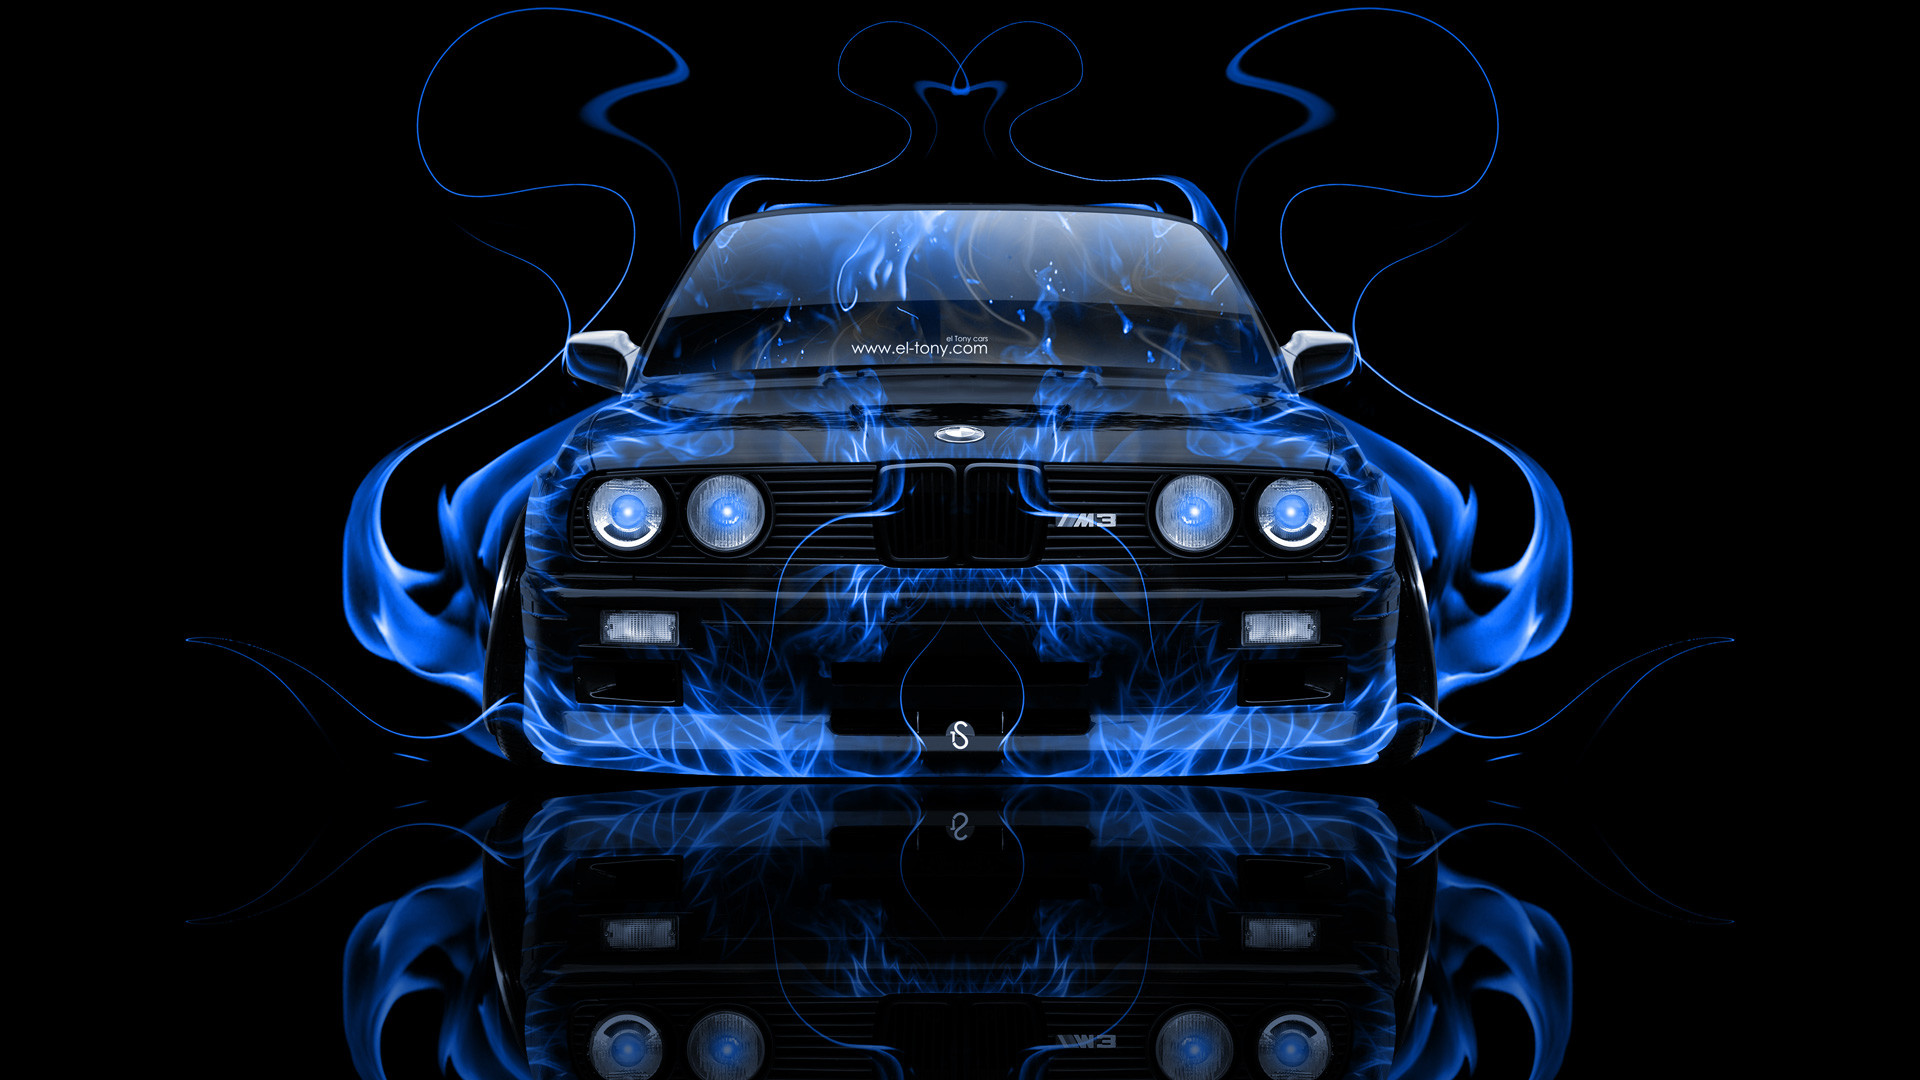 1920x1080 BMW-M3-E30-Front-Blue-Fire-Abstract-Car-2014-HD-Wallpapers-design-by .